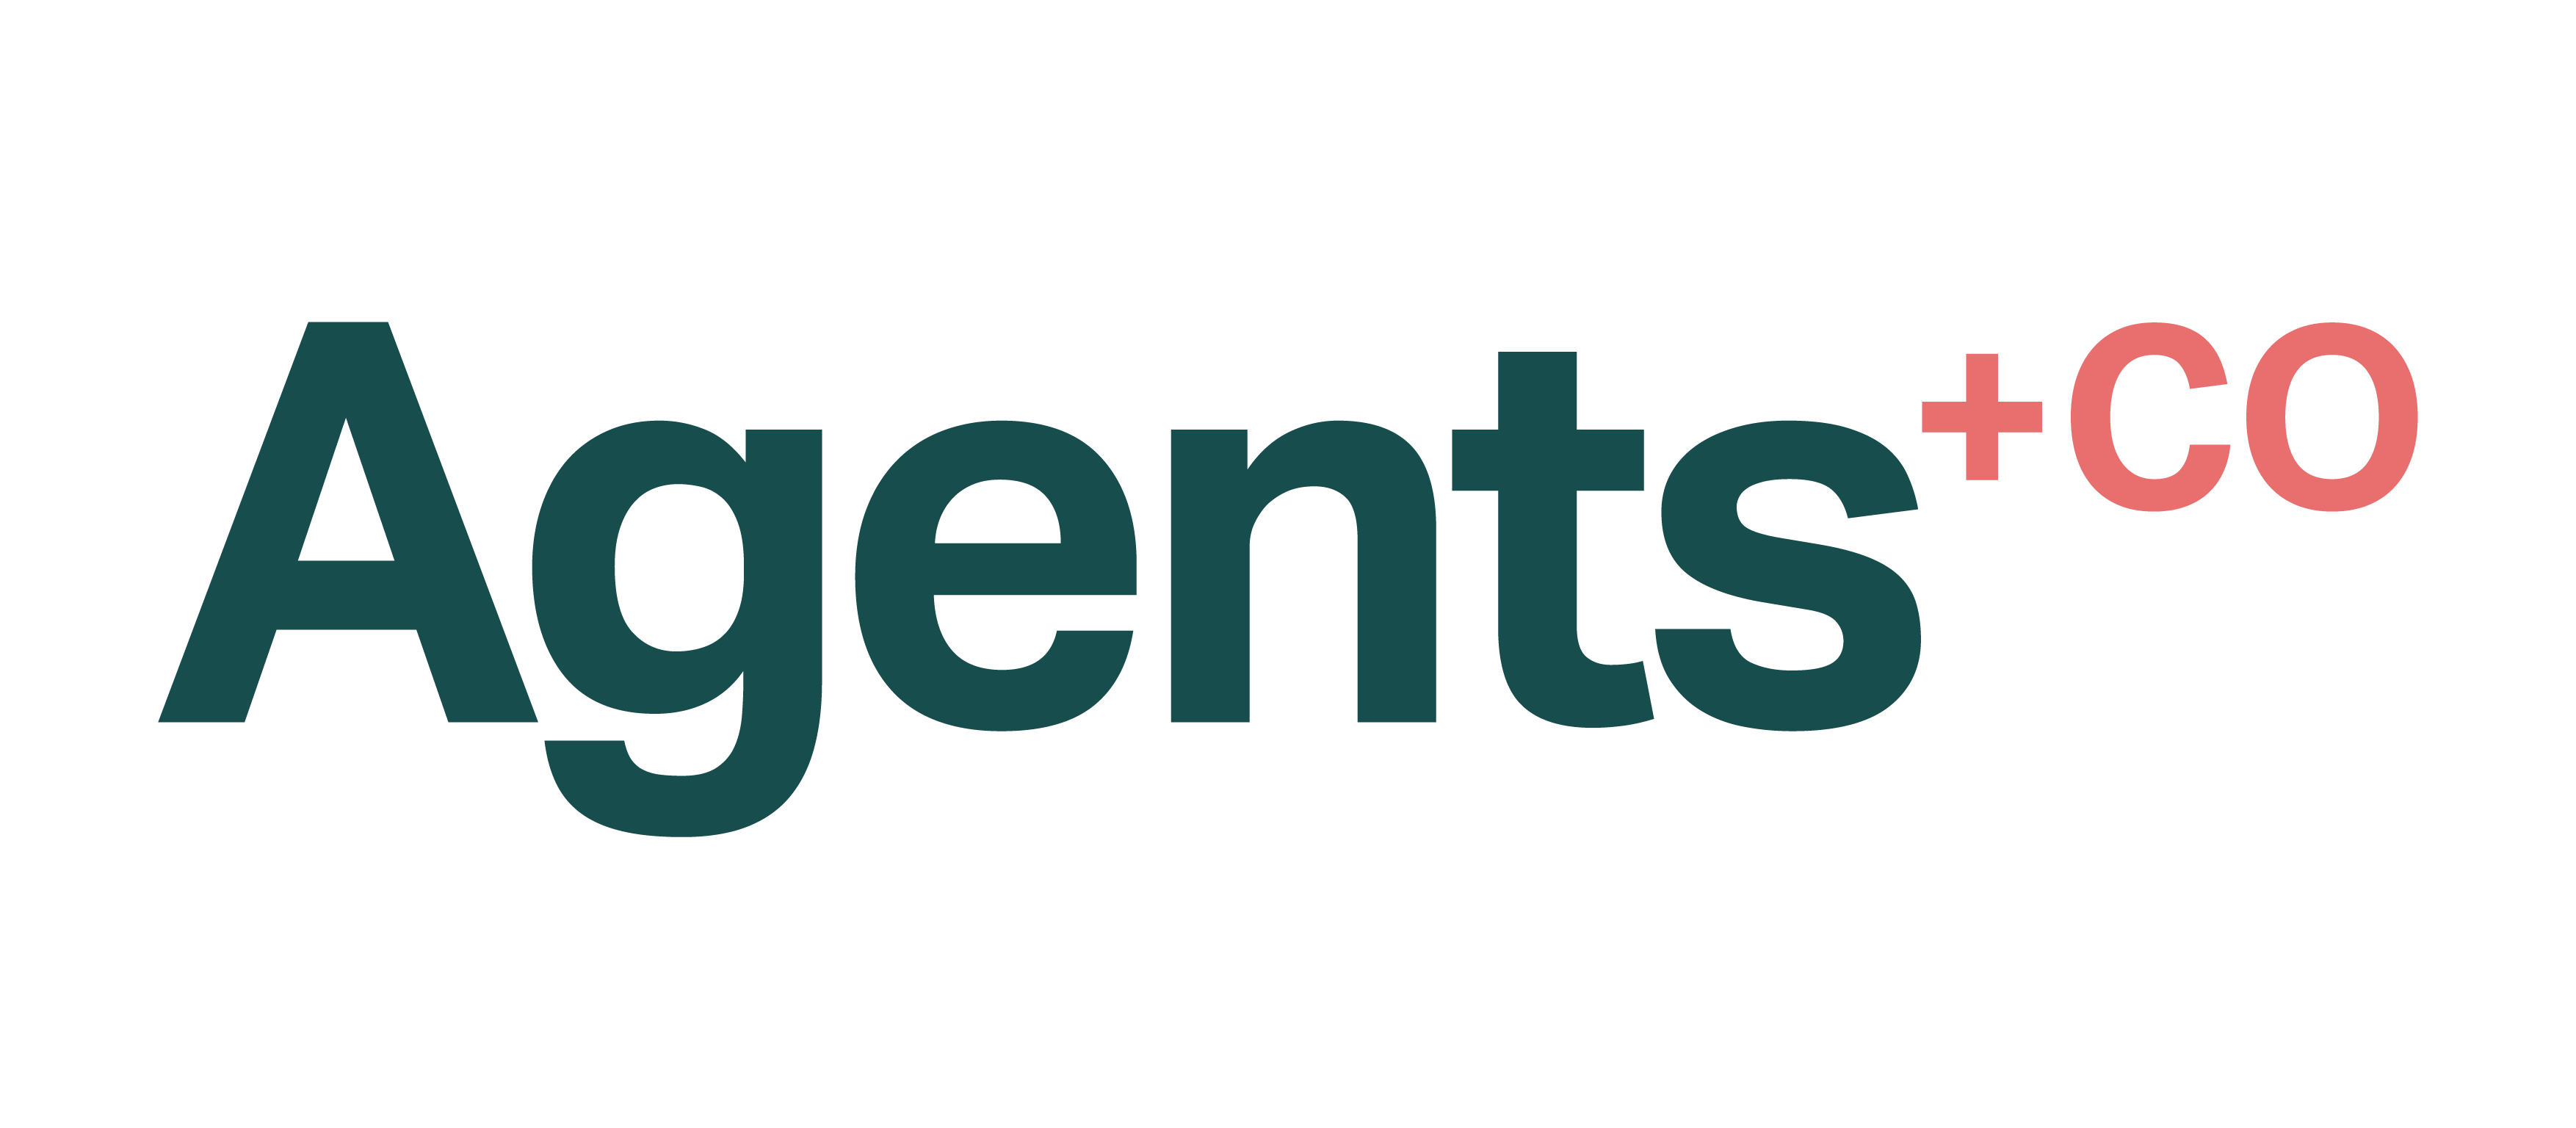 Agents + Co Property Group